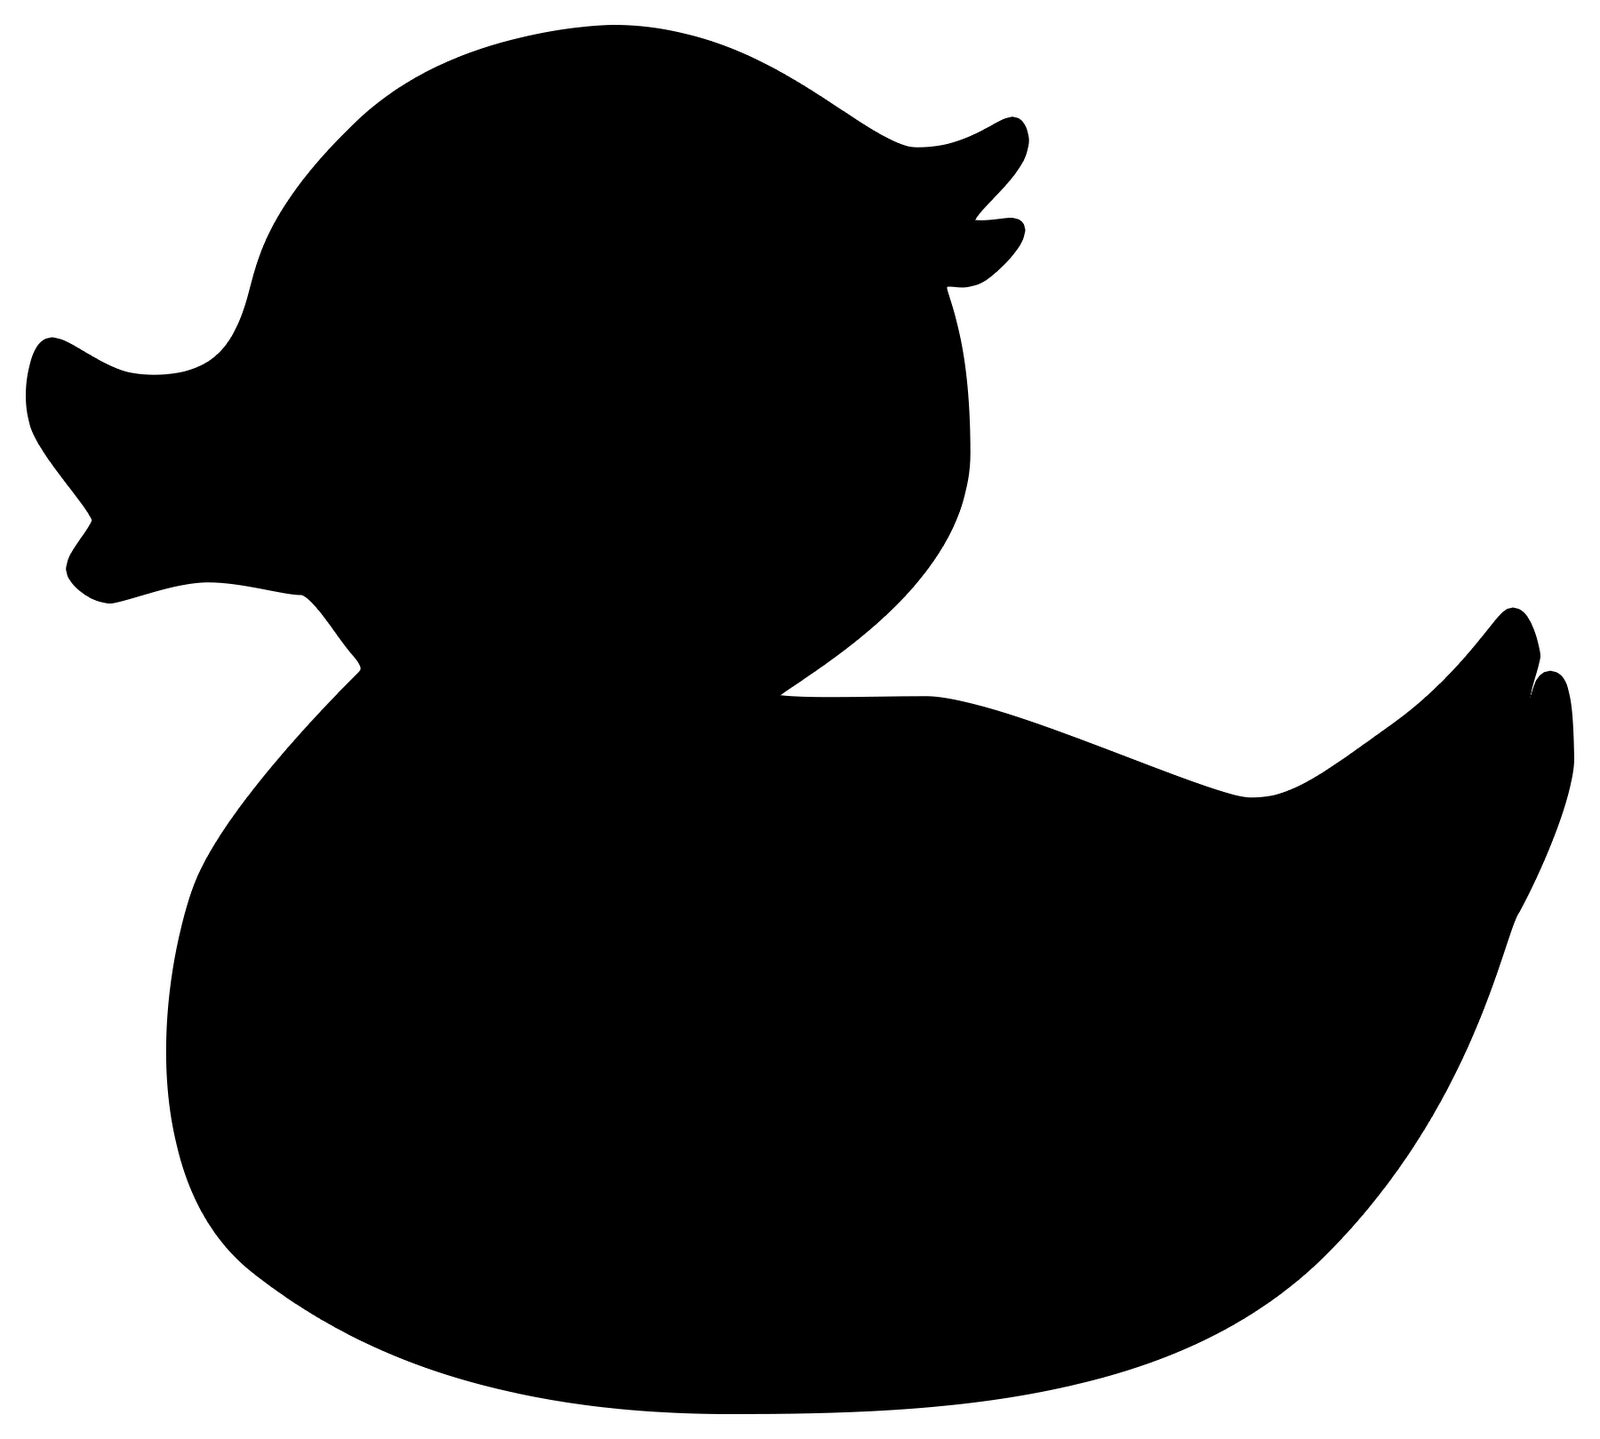 18 Duck Silhouette Free Cliparts That You Can Download To You Computer